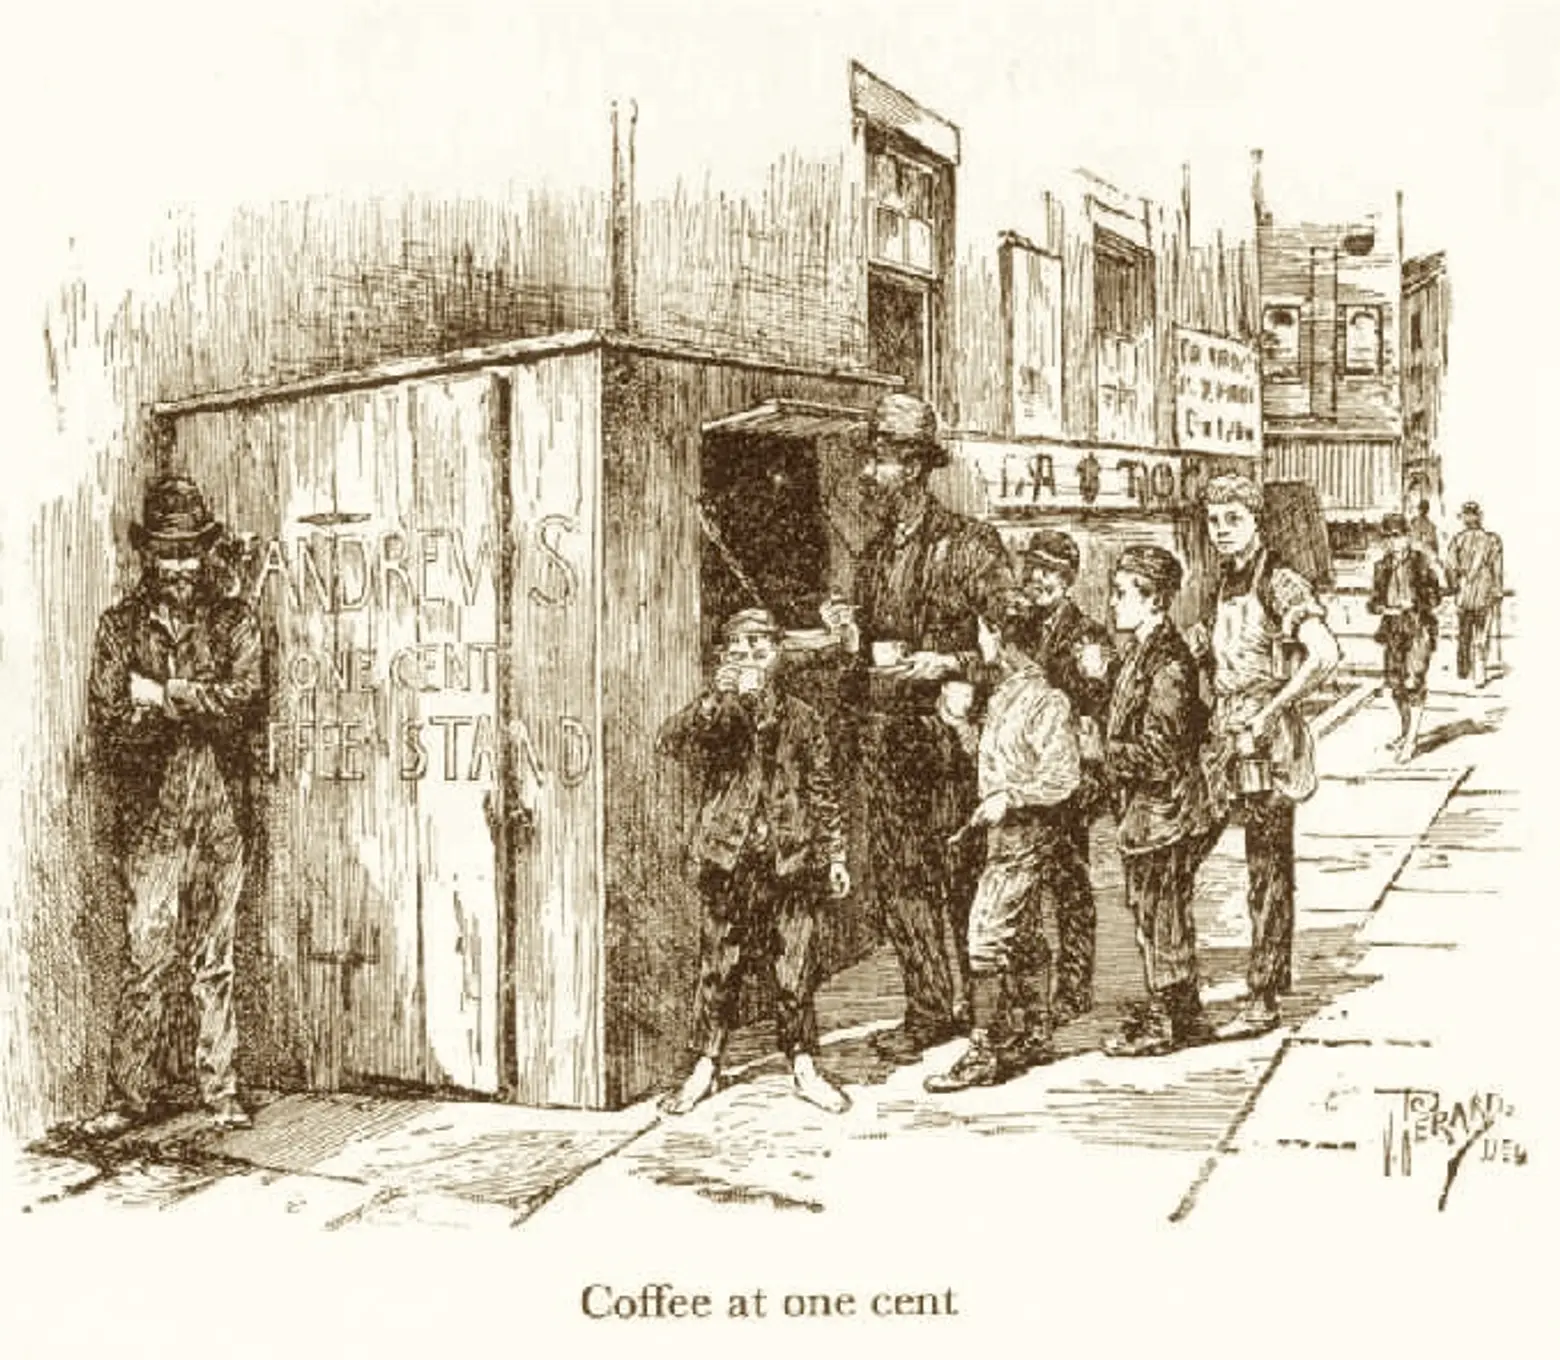 St. Andrews One Cent Coffee Stand, Clementine Lamadrid, Frank Leslie's Sunday Magazine